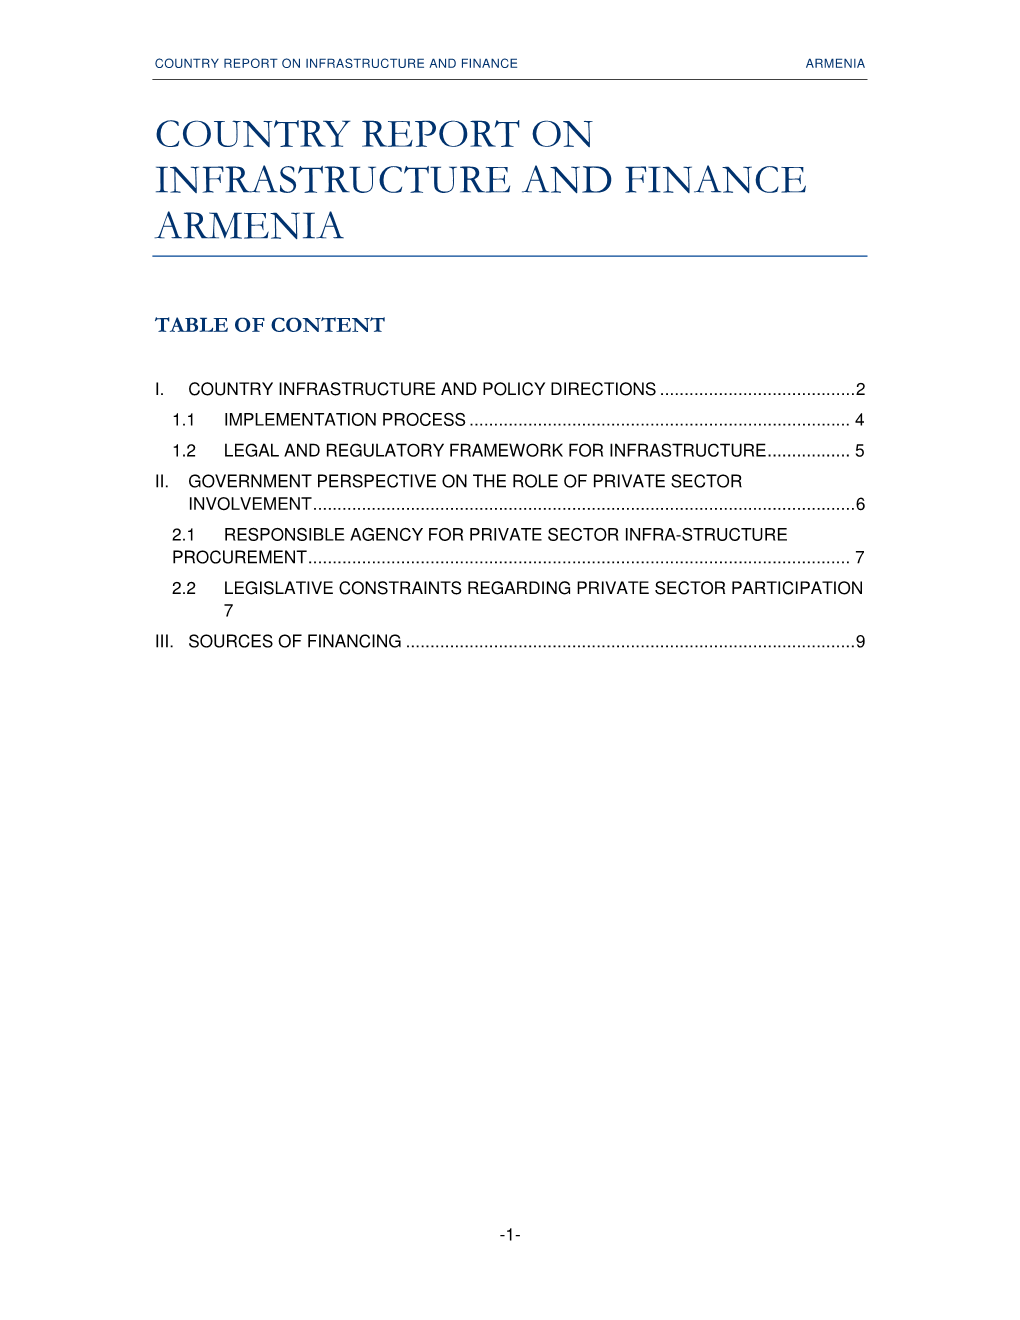 Country Report on Infrastructure and Finance Armenia